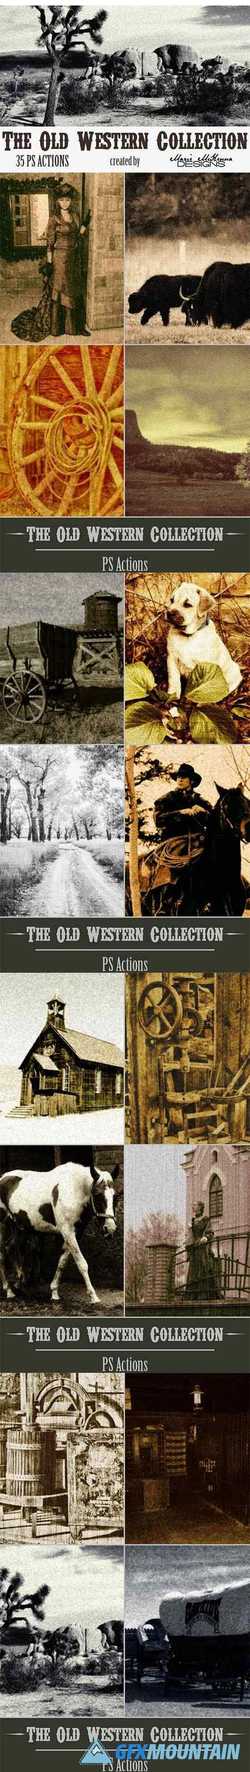 The Old Western Collection Actions